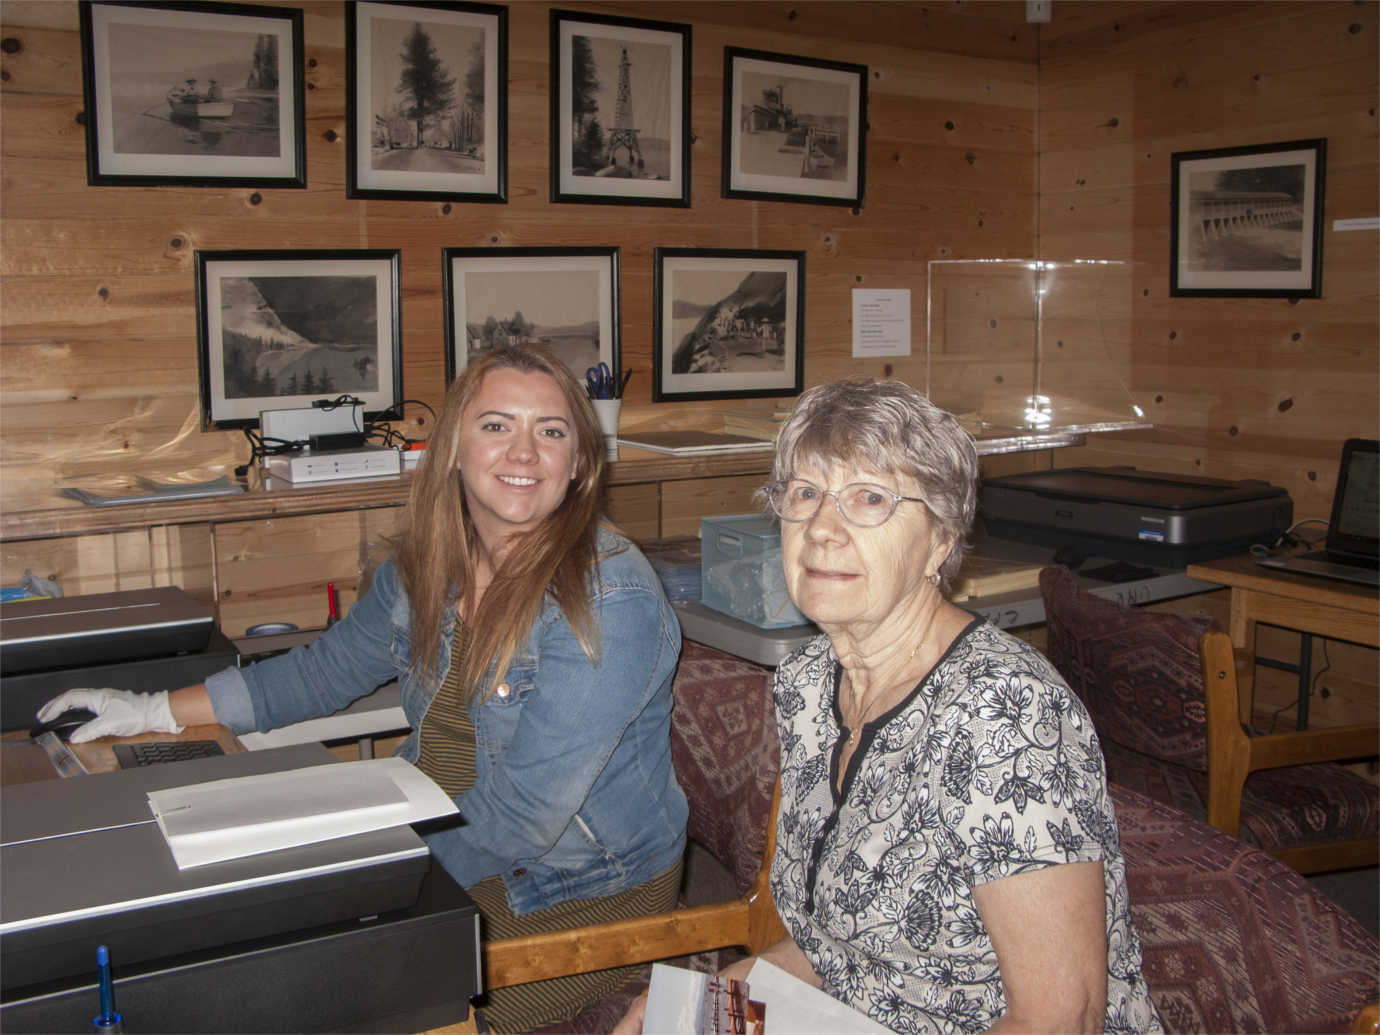 Dani Smith and Janet Eby at the Gatekeeper’s Museum for the North Lake Tahoe Digitization Day on June 26, 2016. Image courtesy of the University of Nevada, Reno.